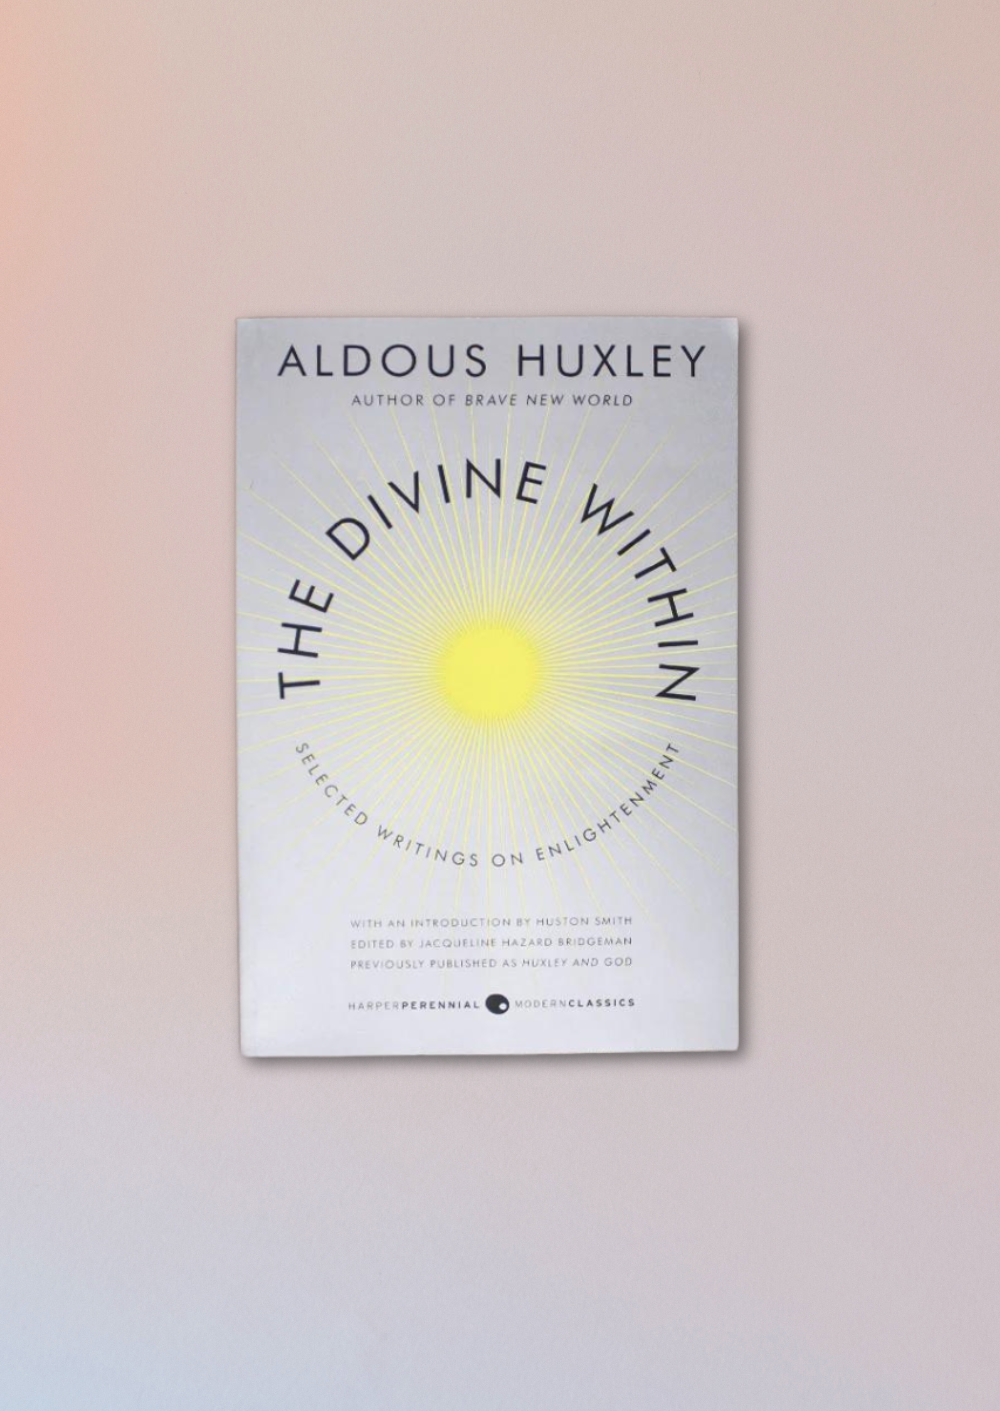 Aldous Huxley - The Divine Within